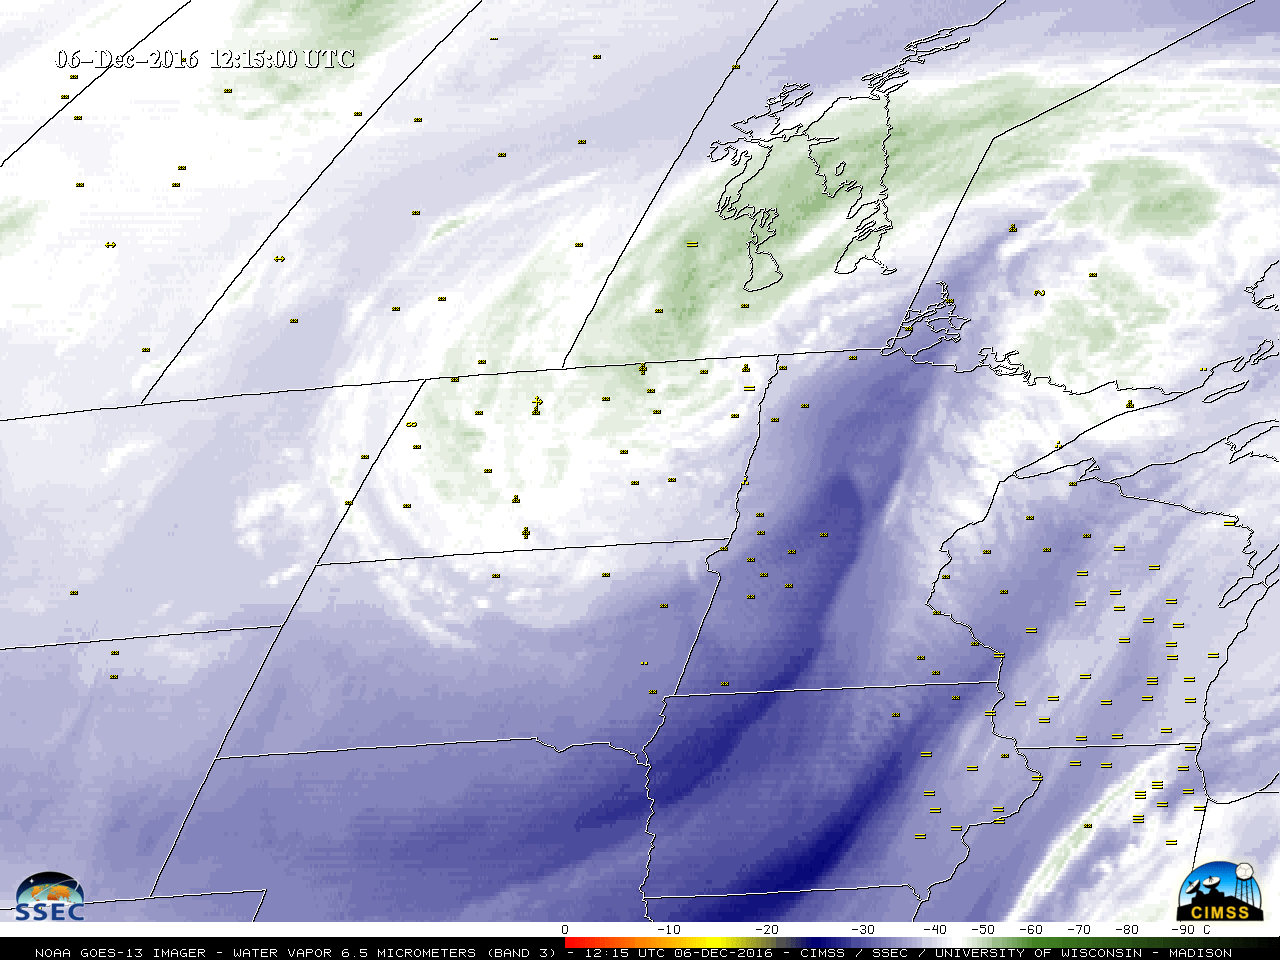 GOES-13 Water Vapor (6.5 µm) images, with hourly surface weather symbols [click to play animation]